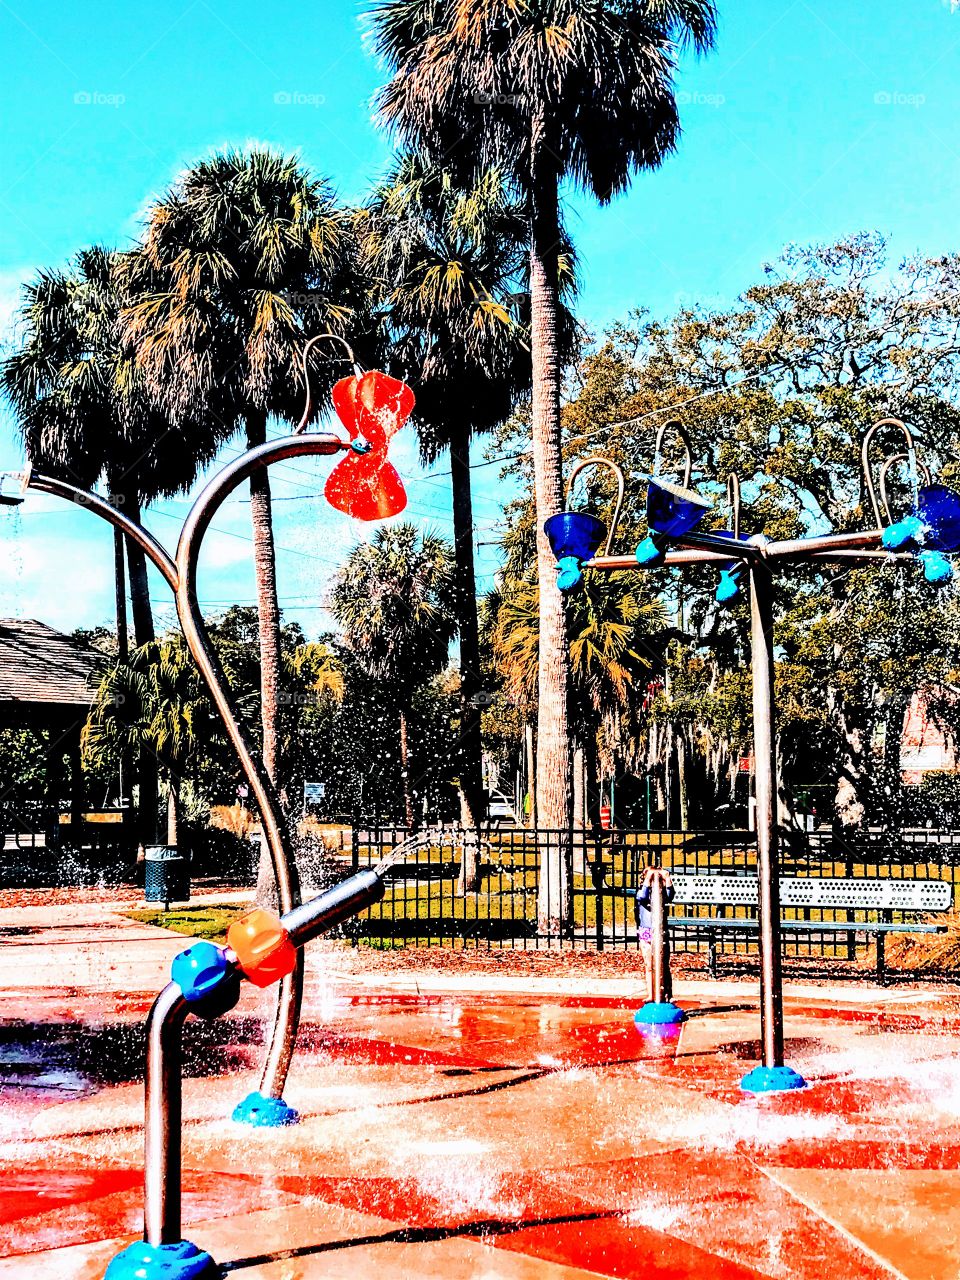 Lotos of orange and red colors,palm trees all around it, what is sprinkles playground